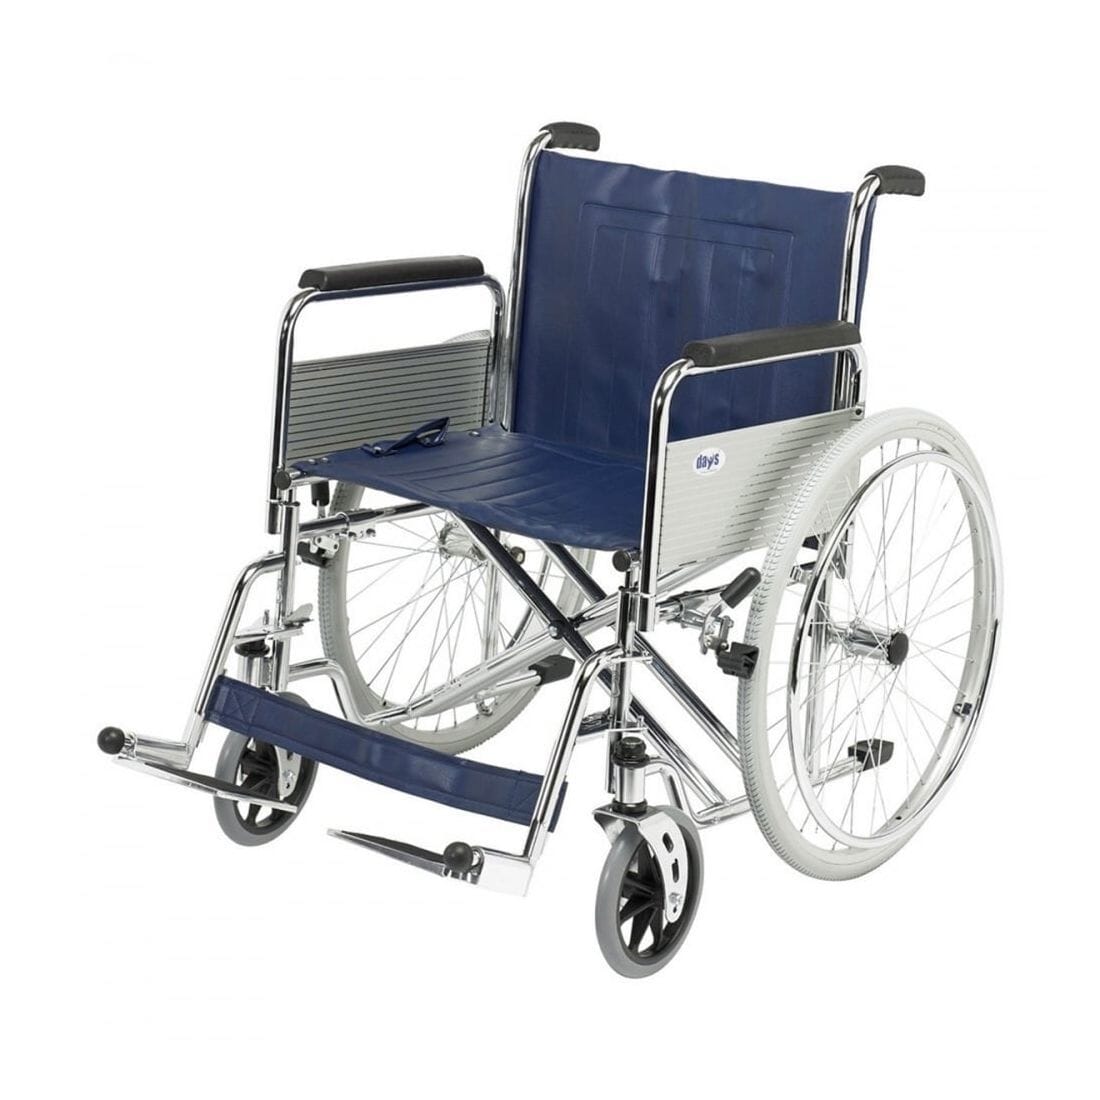 View Days Heavy Duty SelfPropelled Wheelchair Extra Wide Heavy Duty SelfPropelled Wheelchair with Detachable Armrests and Footrests information